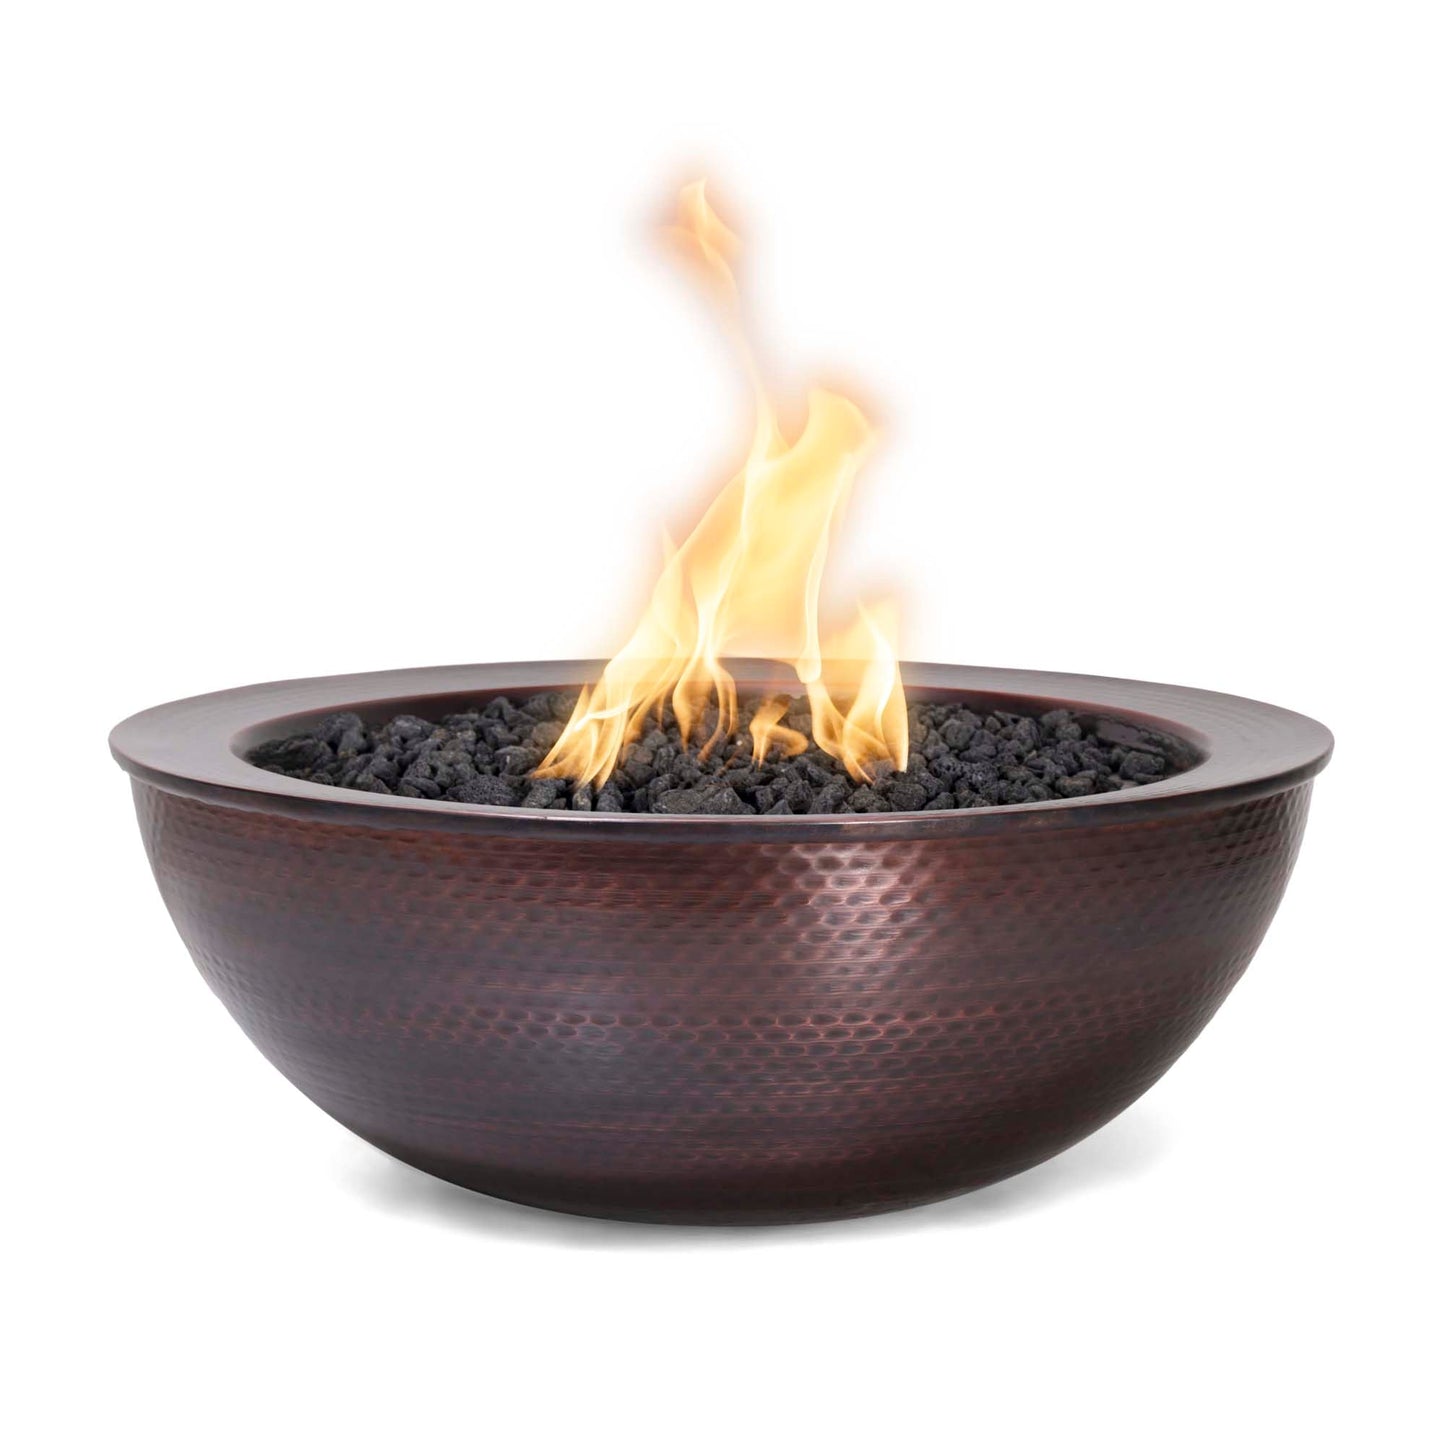 The Outdoor Plus Sedona Fire Bowl Hammered Patina Copper